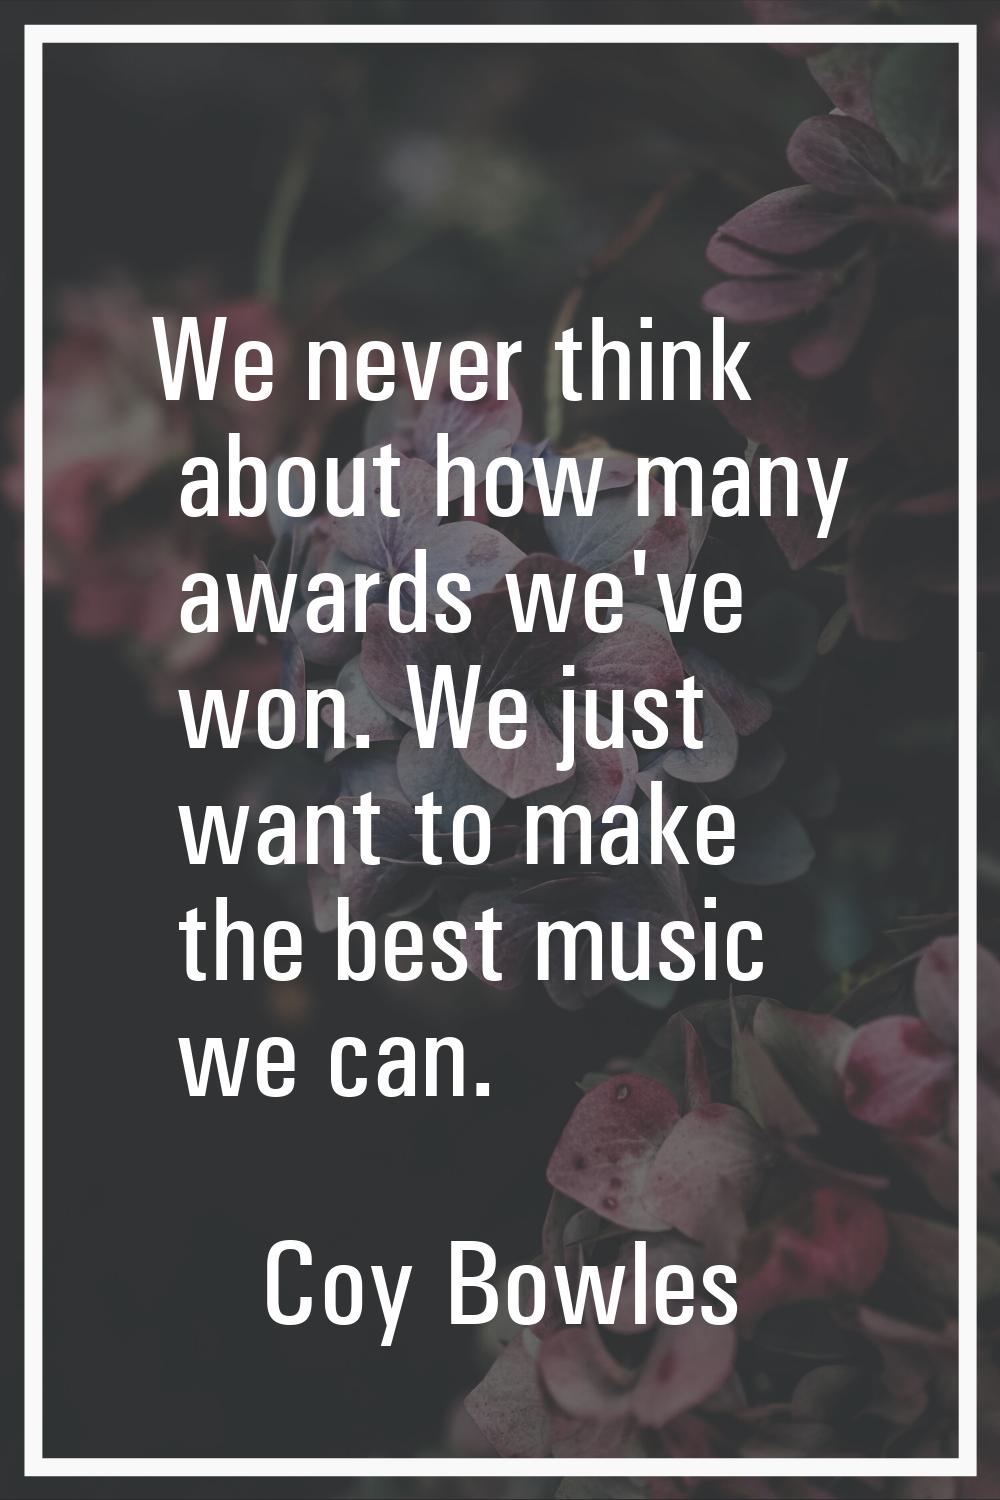 We never think about how many awards we've won. We just want to make the best music we can.